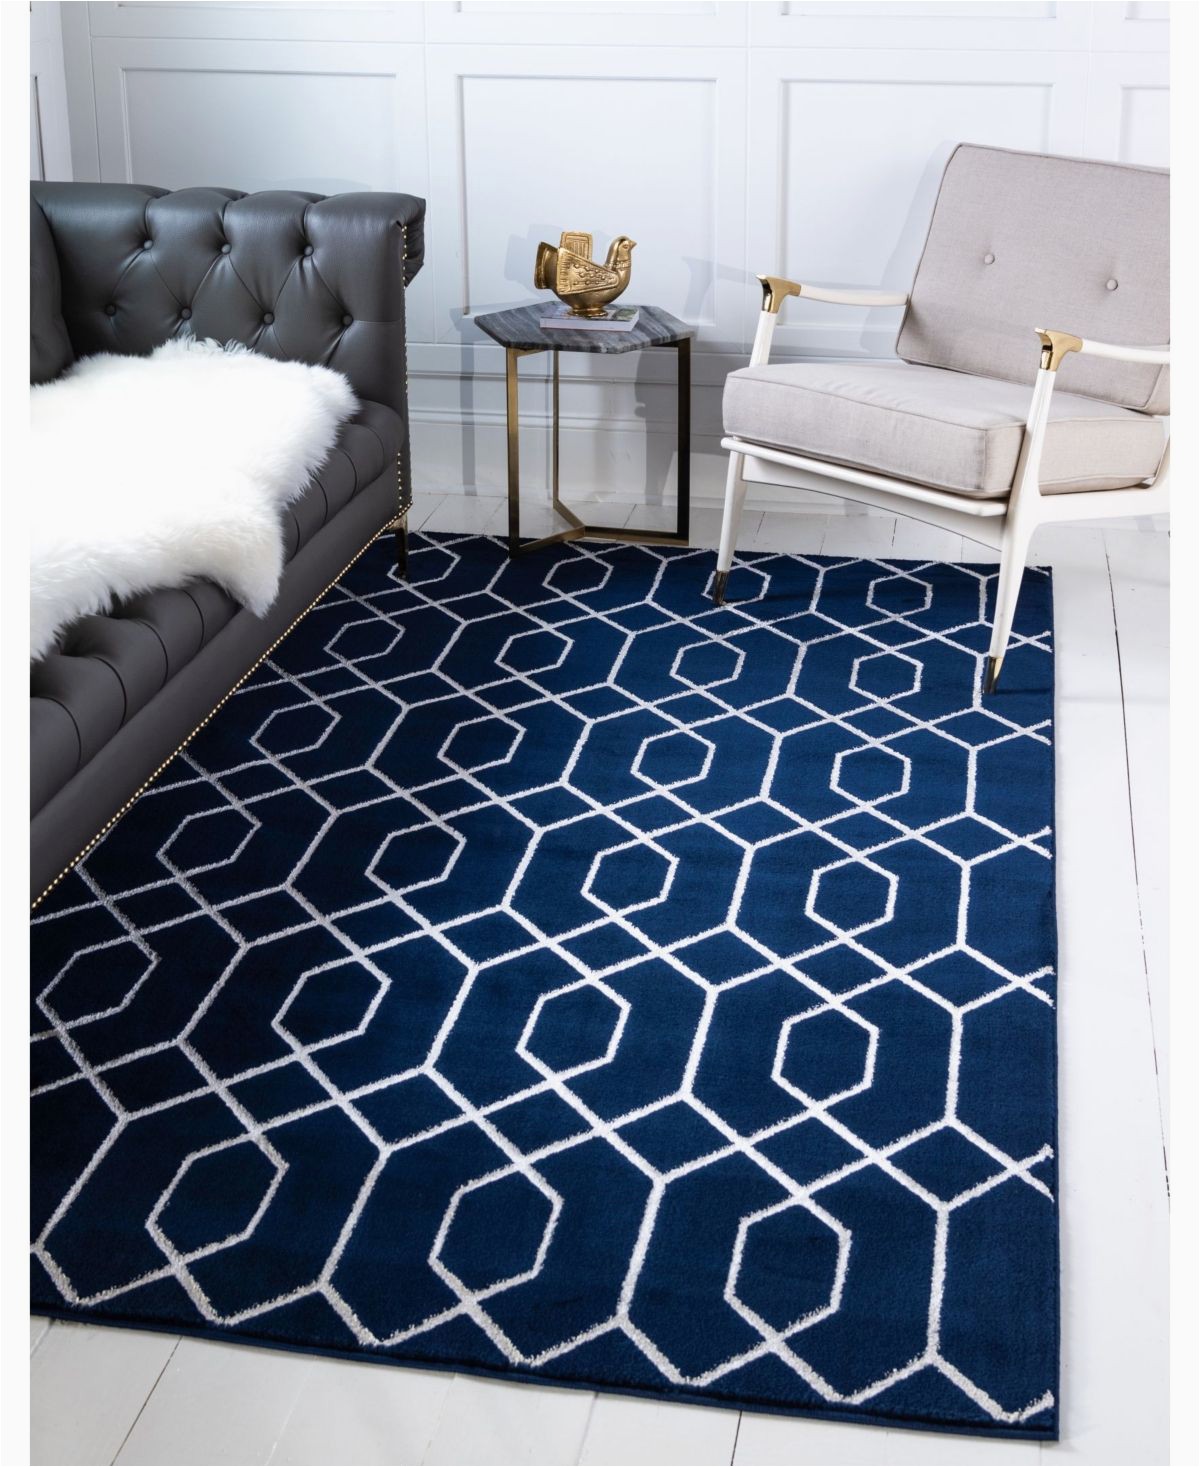 Royal Blue and Gold area Rug Marilyn Monroe Glam Mmg001 Navy Blue Silver 9 X 12 area